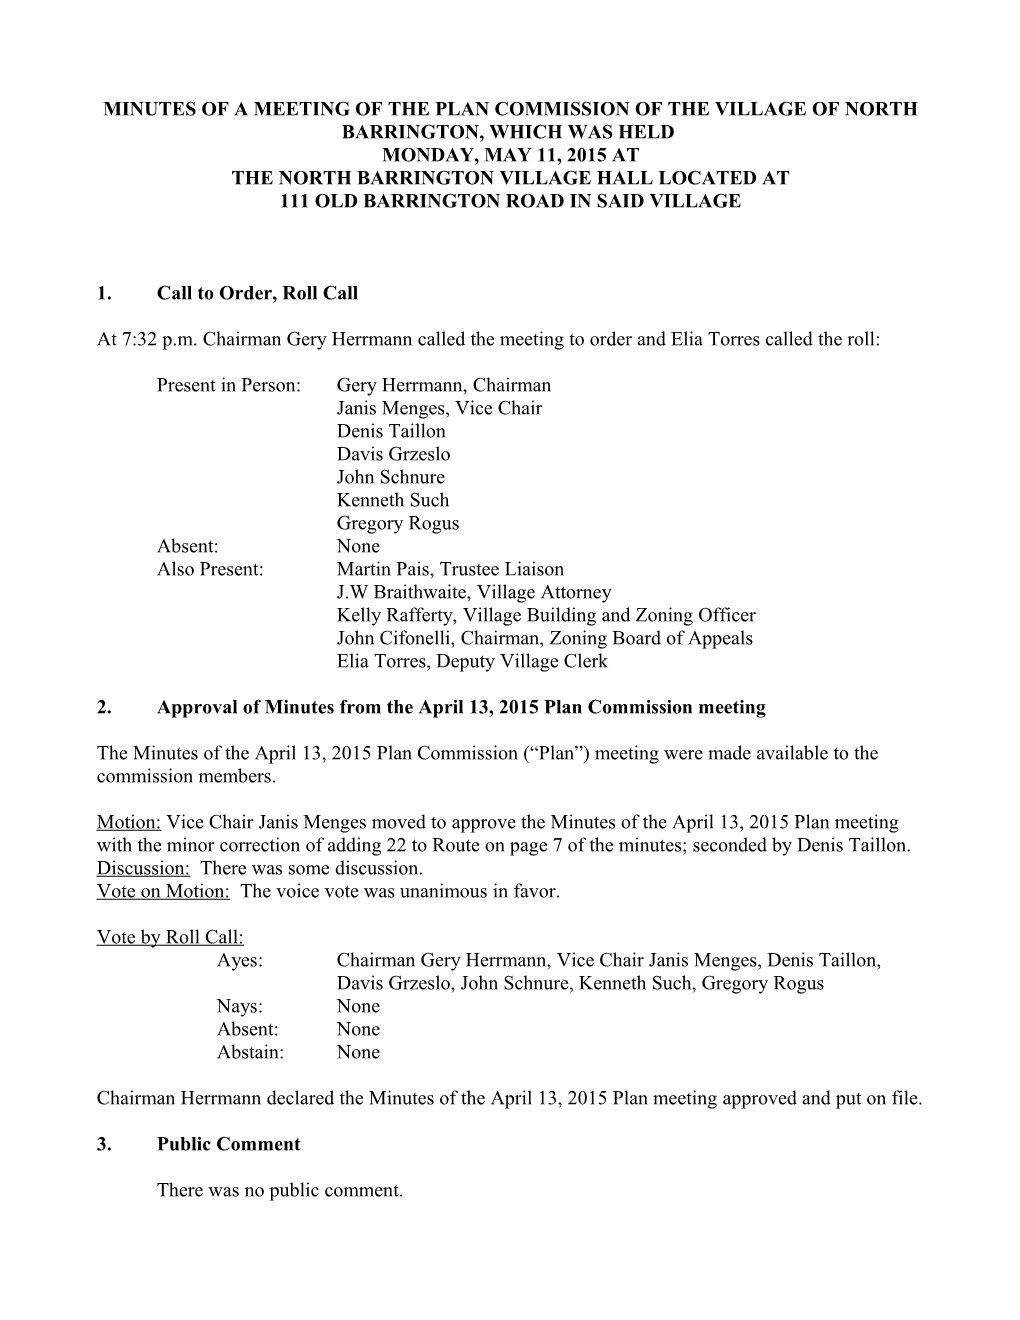 Minutes of a Meeting of the Health and Sanitation Commission of the Village of North Barrington